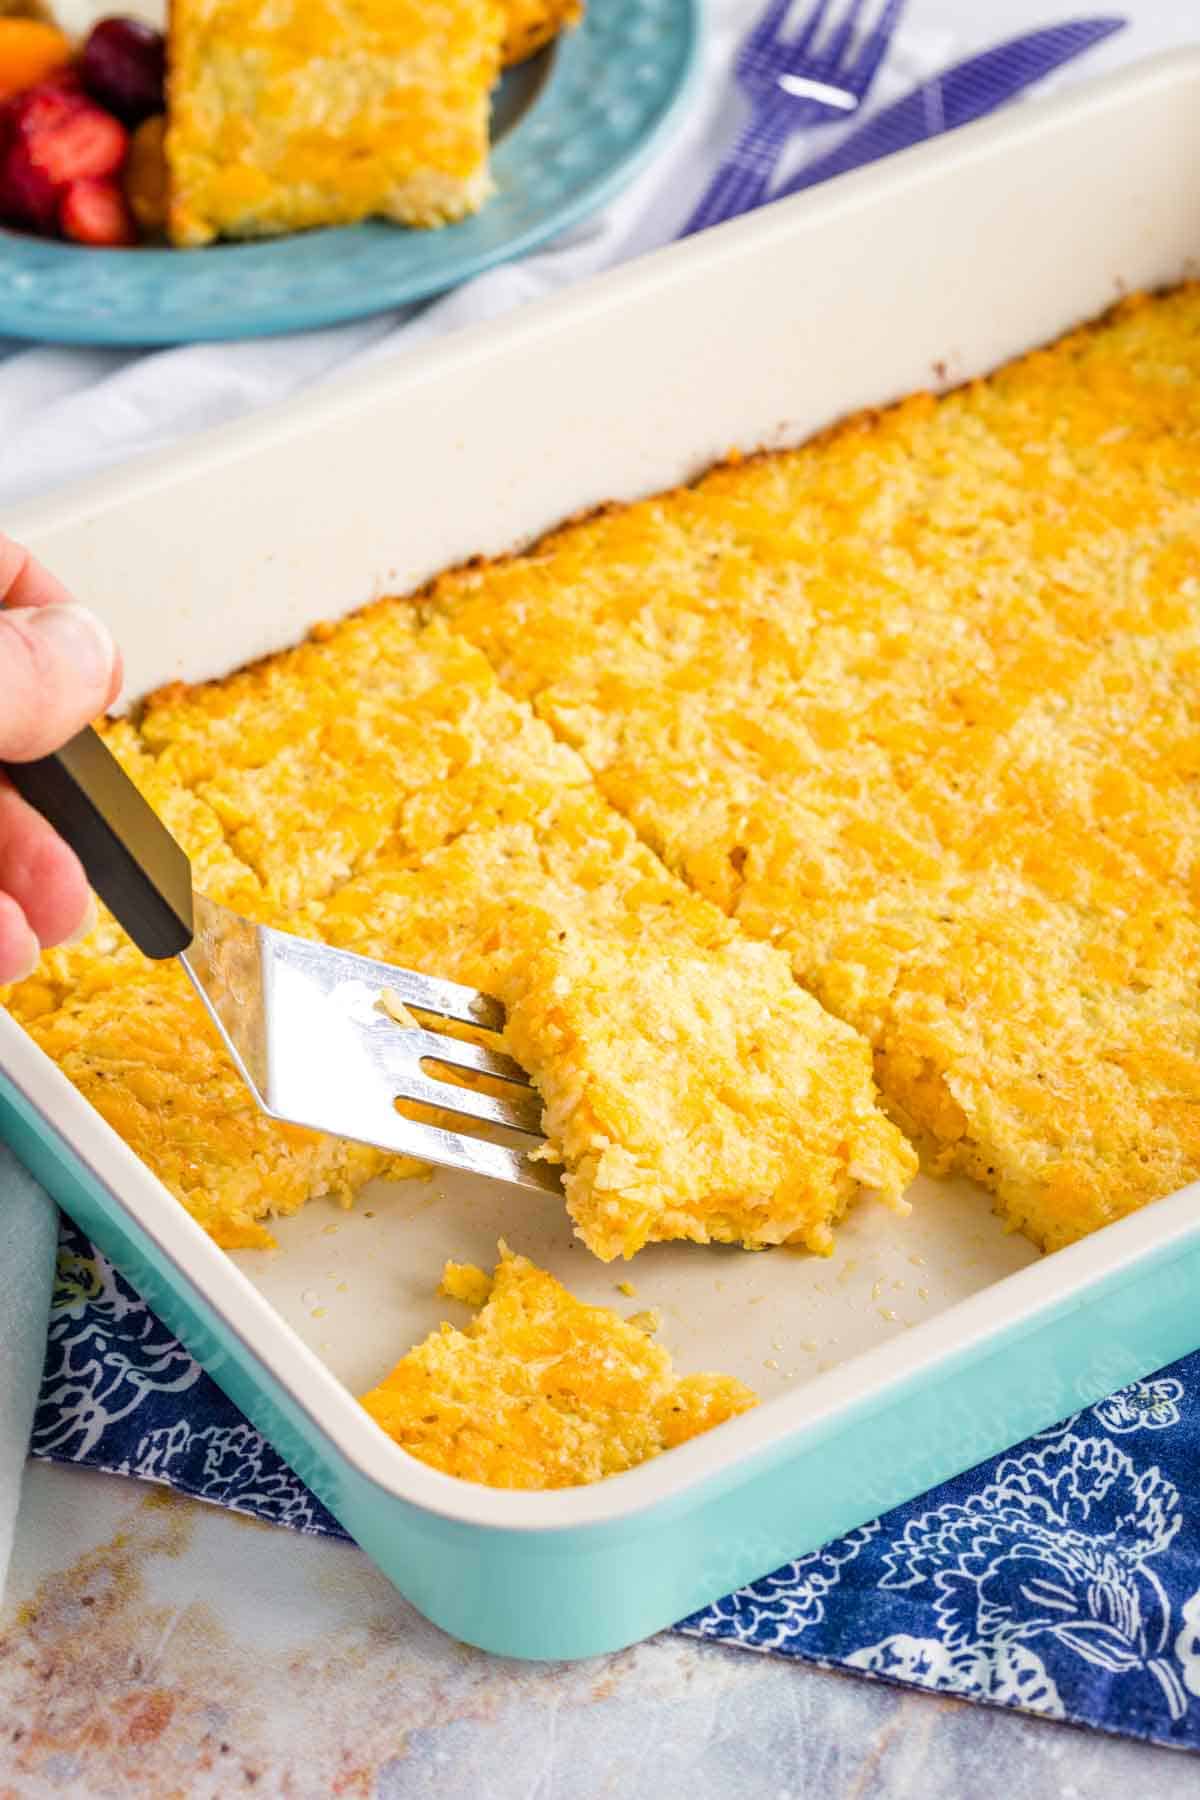 Serving Cauliflower Hash Browns Breakfast Bake from a rectangular pan with a spatula